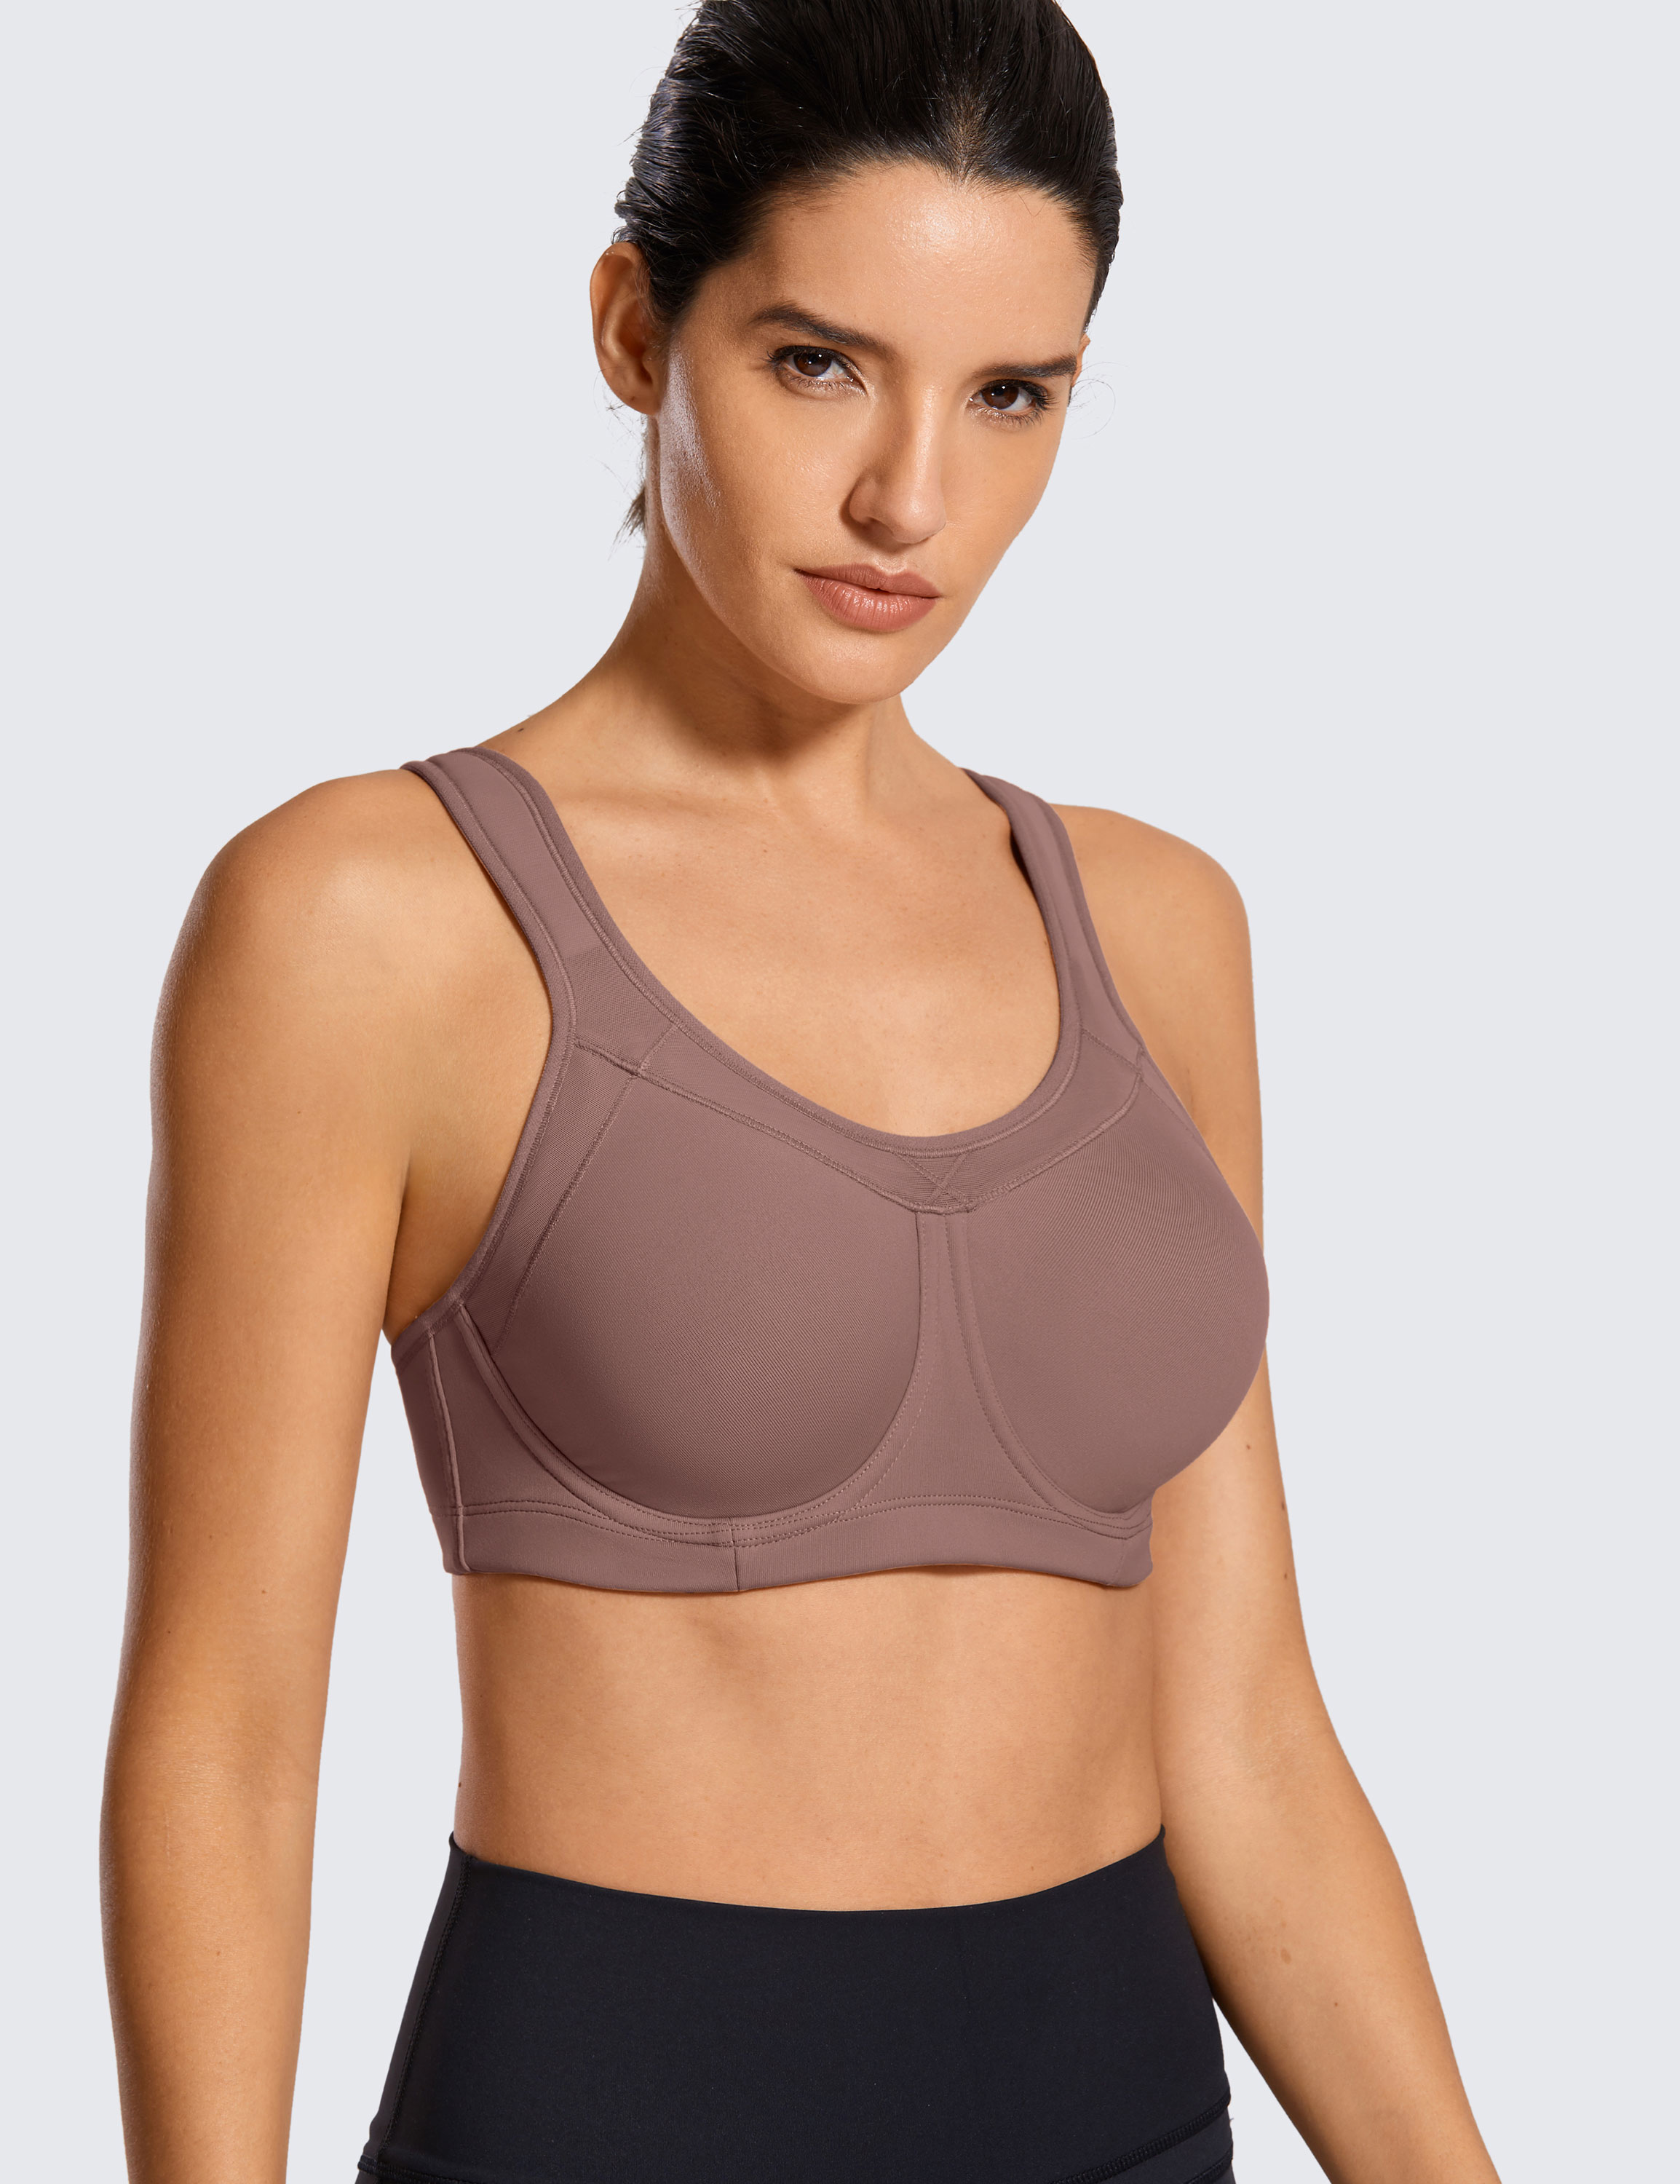 SYROKAN Womens High Impact Asymmetrical Sports Bra Full Coverage, Wire  Free, Lightweight Padded Design From Jiangzeming, $18.53